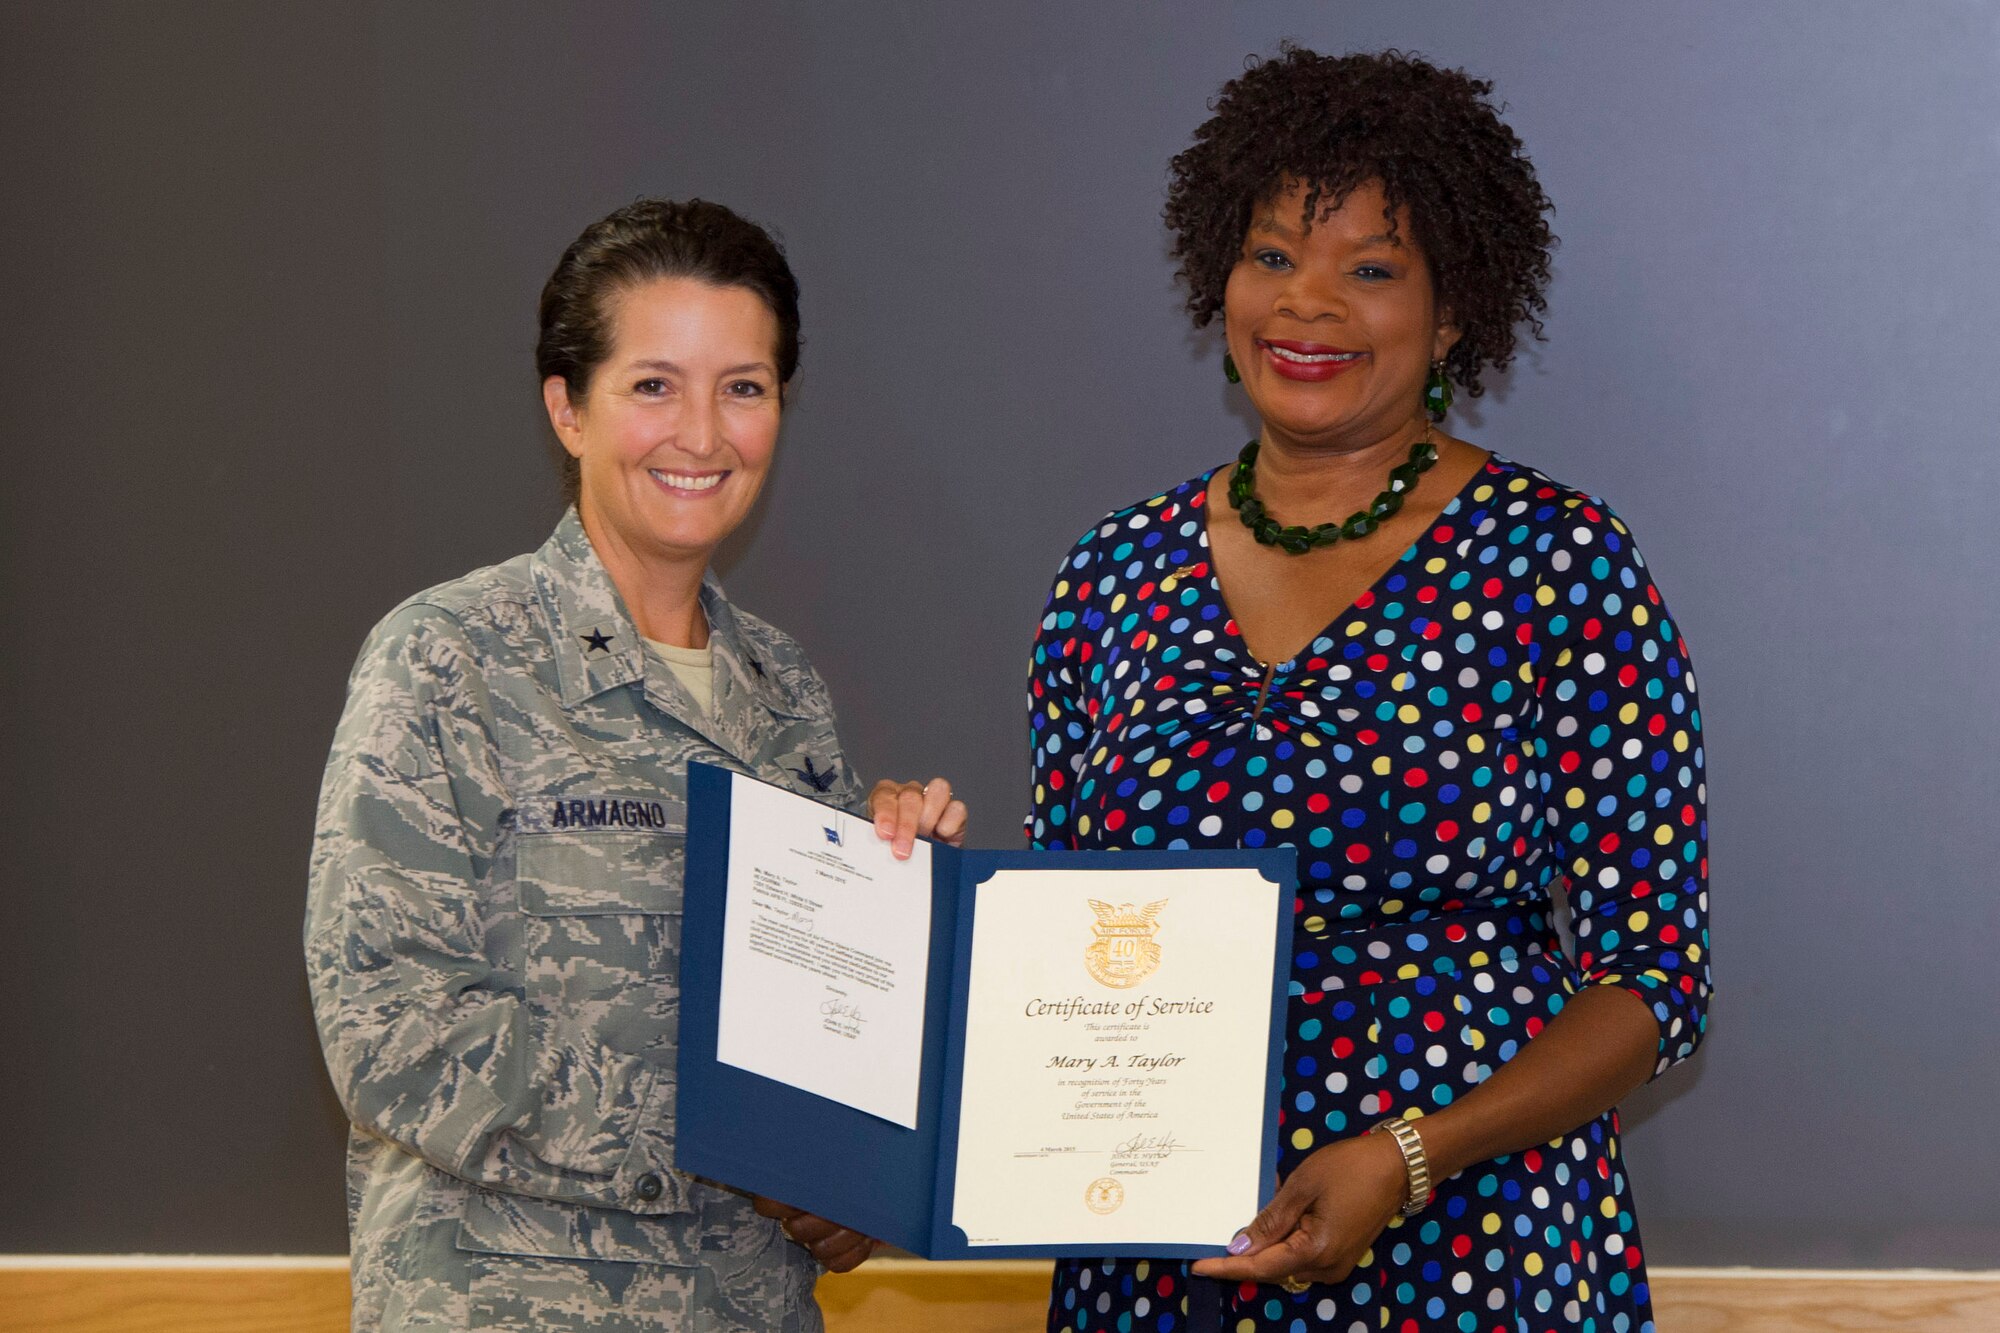 Brig. Gen. Nina Armagno, 45th Space Wing commander, presents Mary Taylor, 45th Space Wing program analyst, with a certificate in recognition of 40 years of federal service, June 10, 2015, at Patrick Air Force Base, Fla.  Taylor served on active duty for 13 years and has worked in civil service for 27 years. (U.S. Air Force photo/Matthew Jurgens) (Released) 